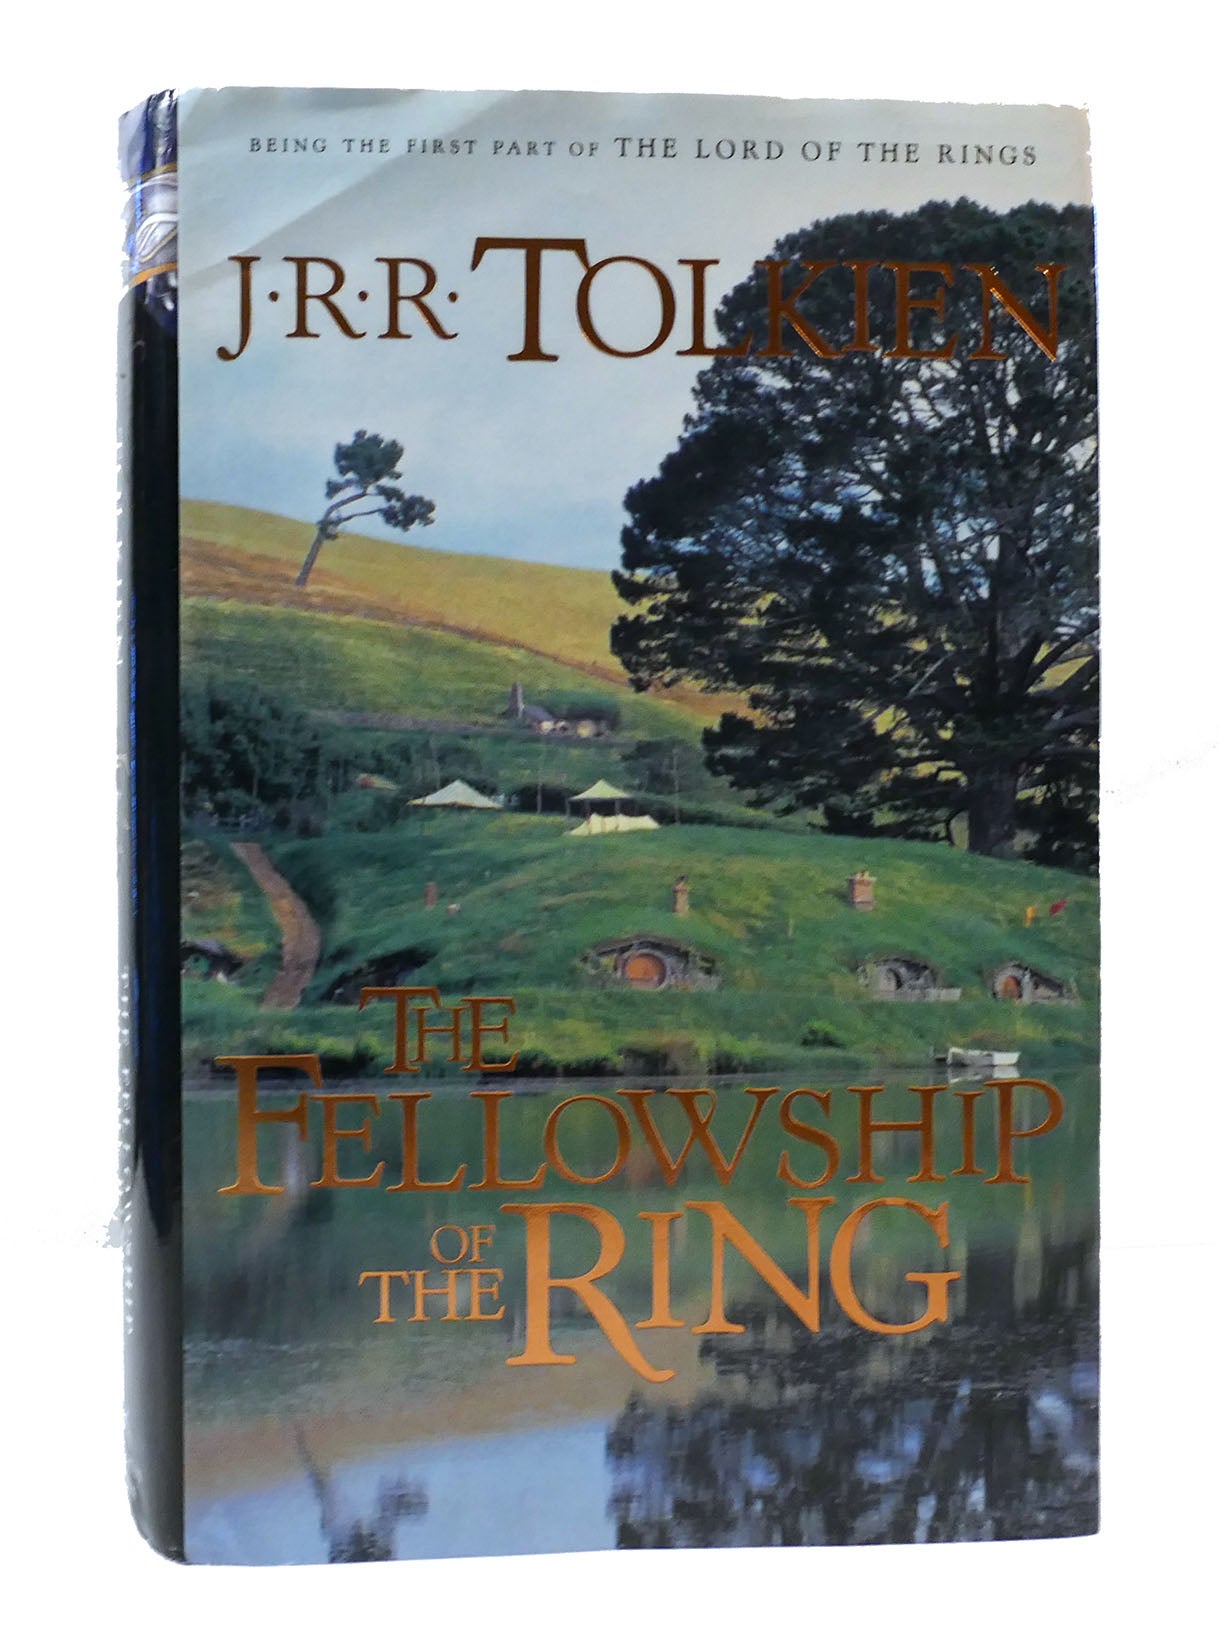 The Lord of the Rings: The Fellowship of the Ring - Original